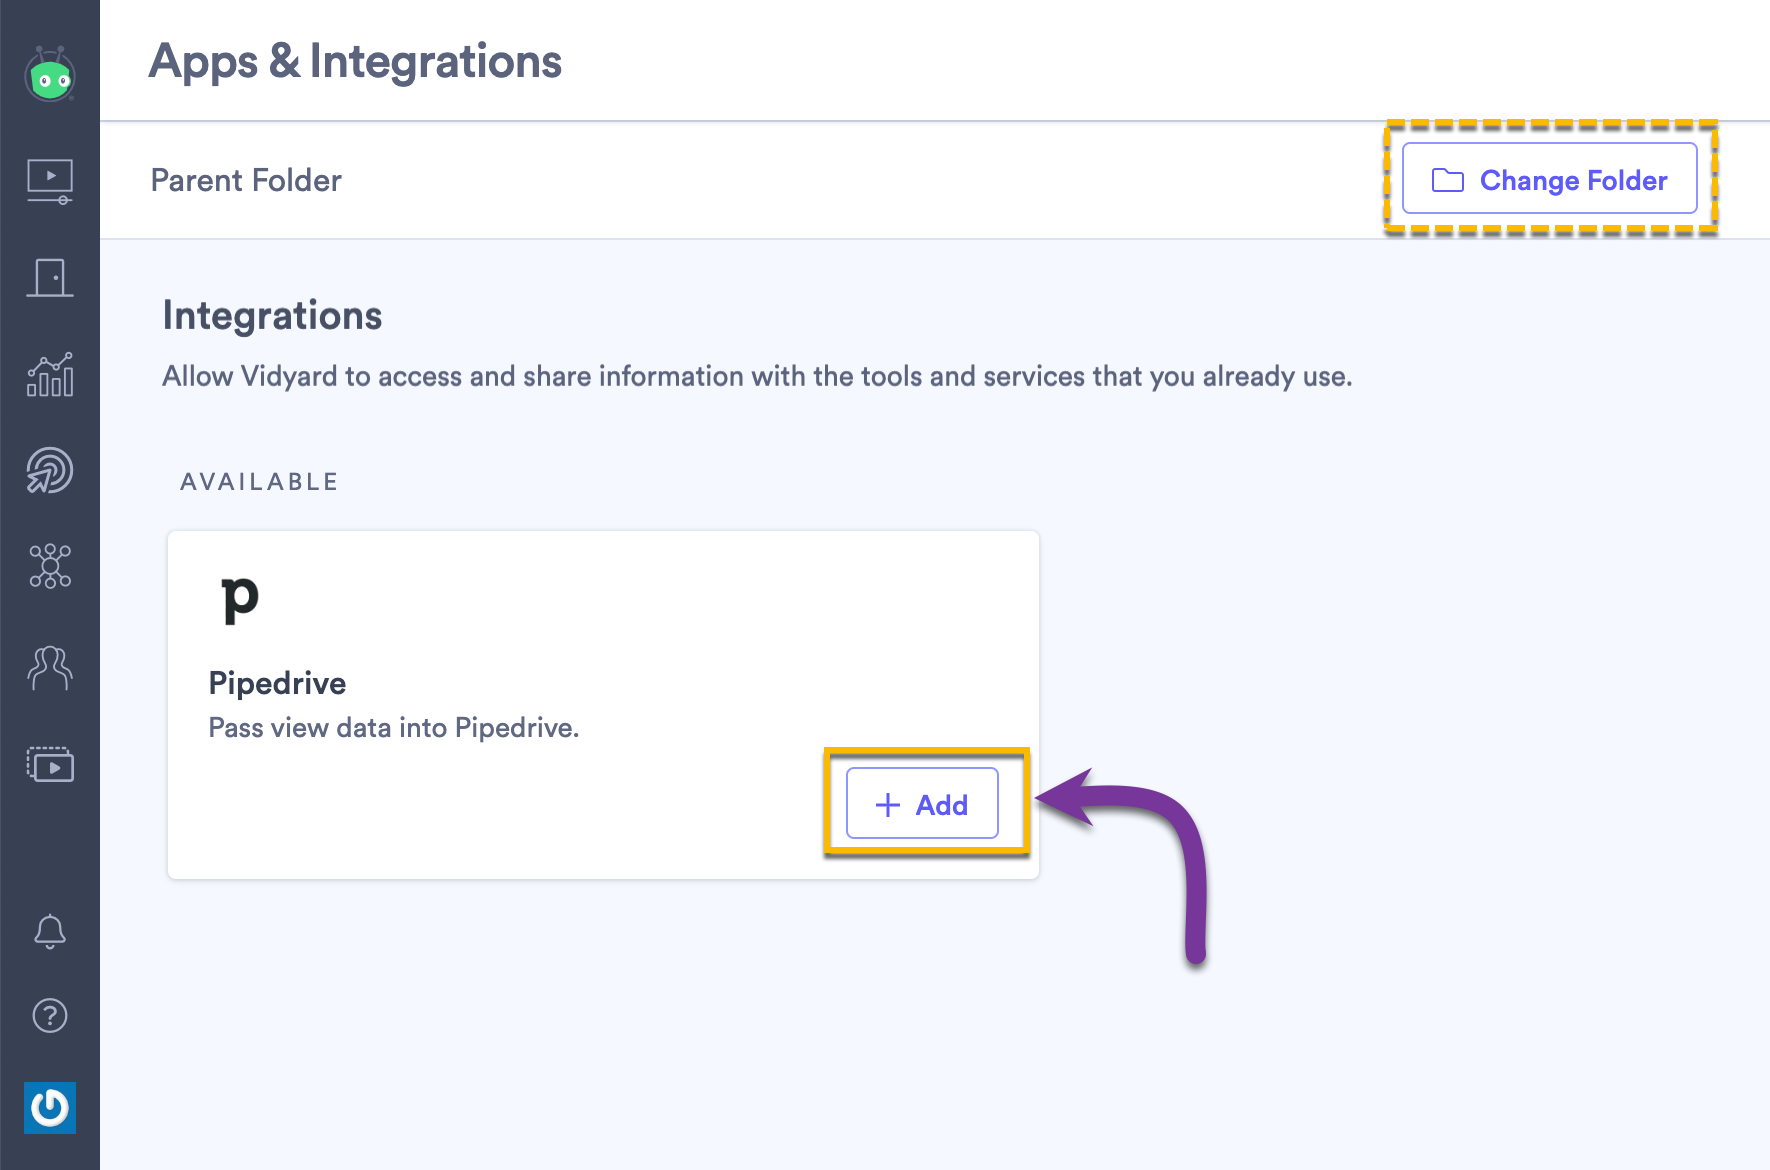 On the integrations page in Vidyard, selecting the Add button next to Pipedrive